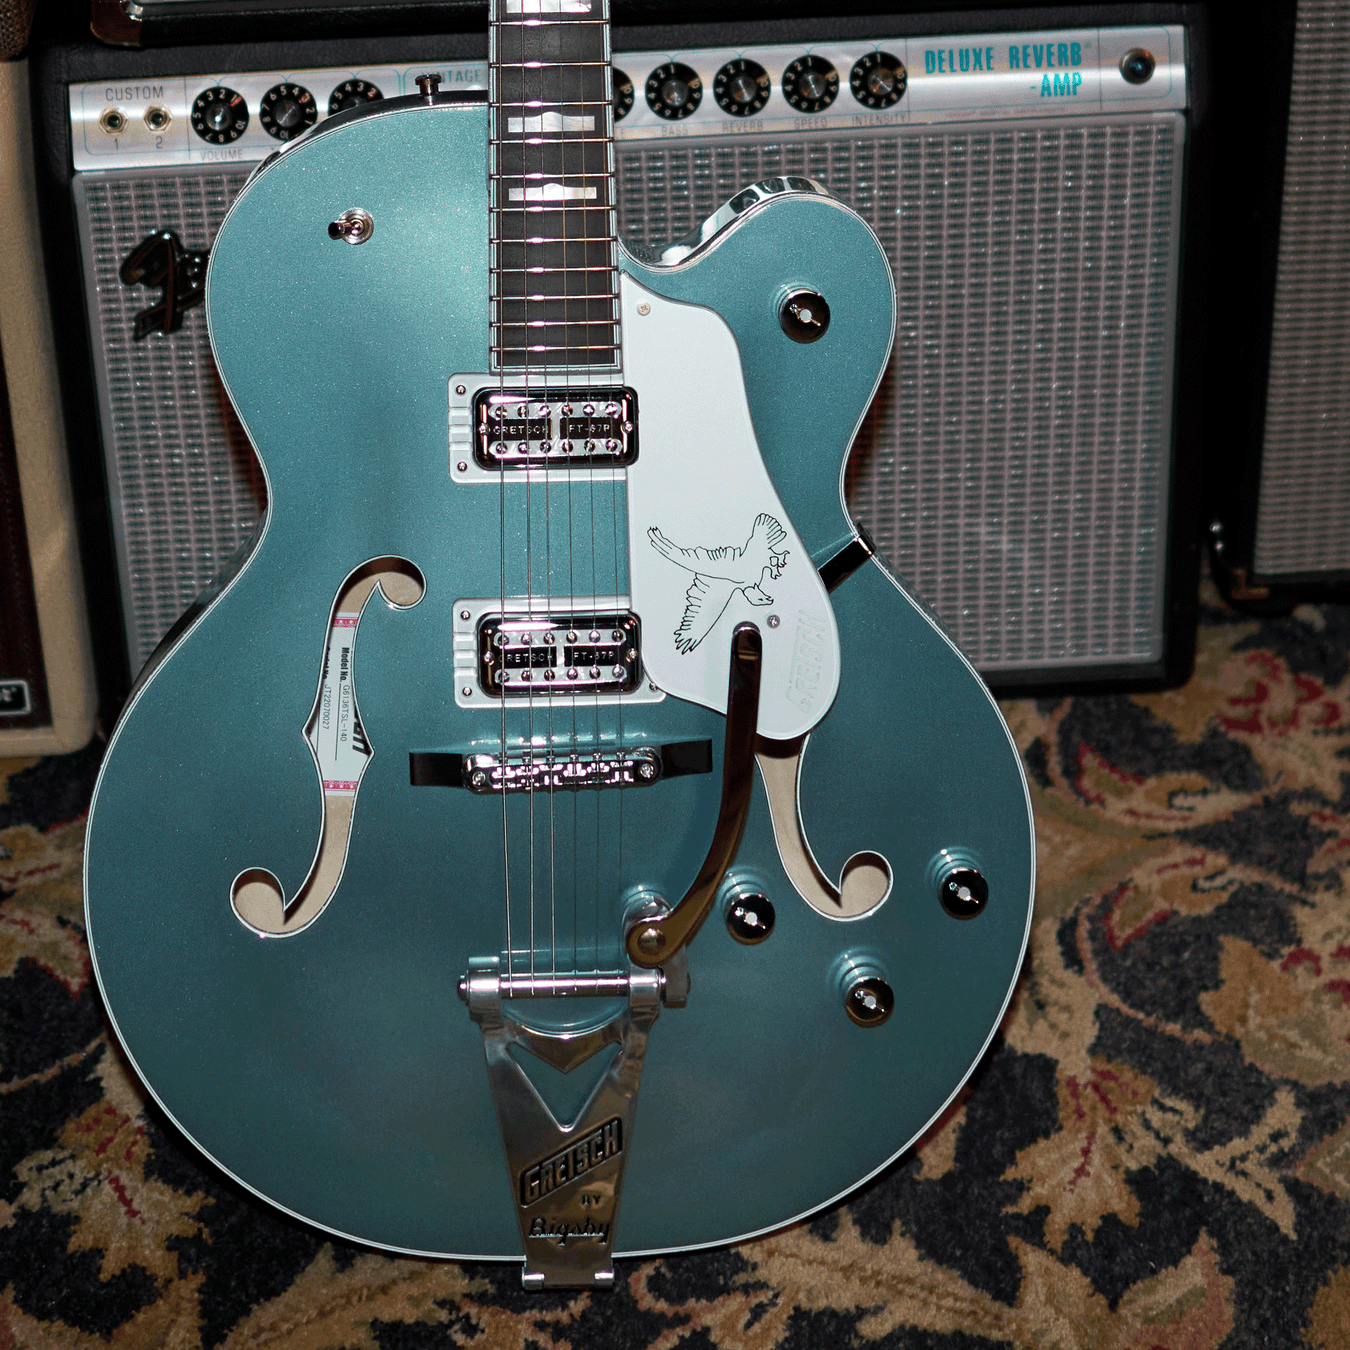 Gretsch Hollowbody leaning against amps